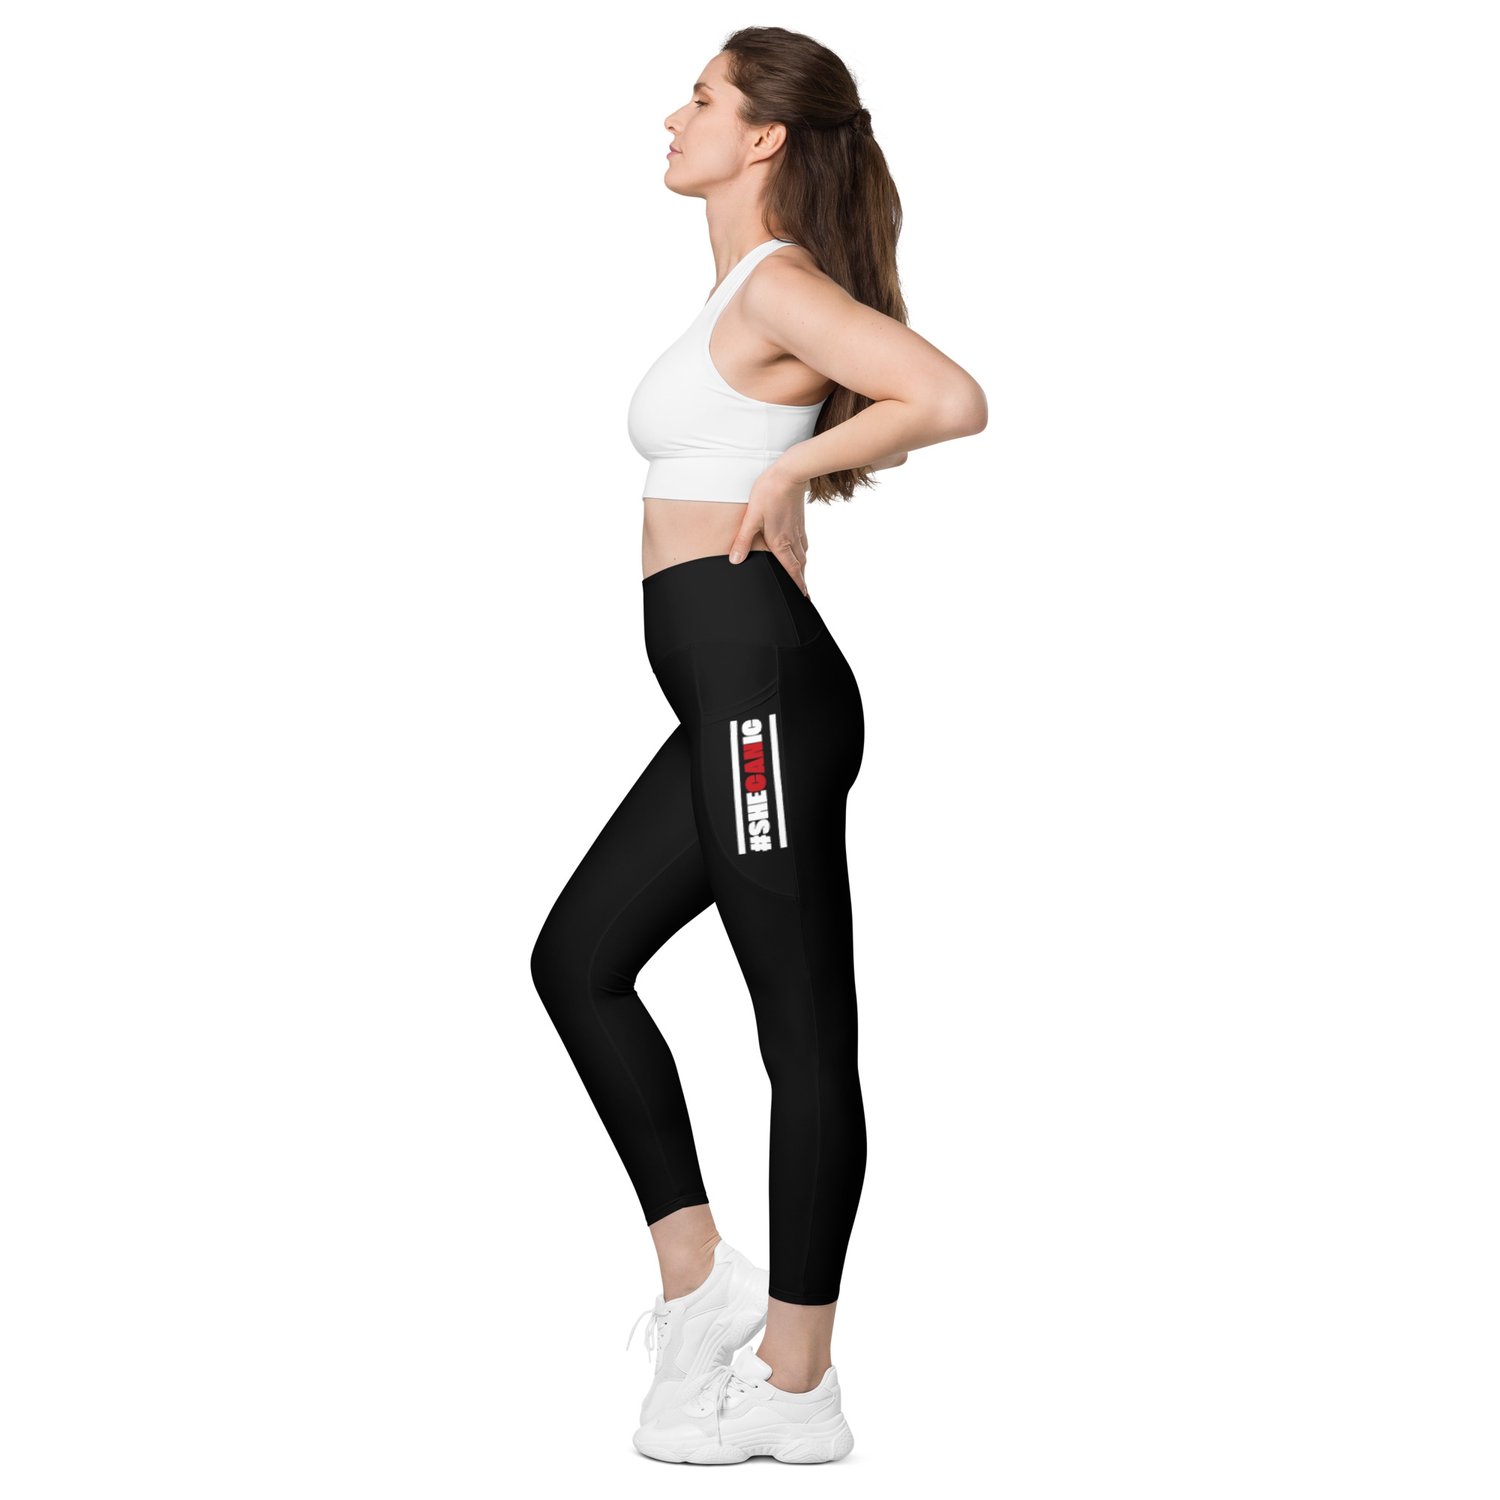 Shecanic Line Leggings with Girls Auto Clinic